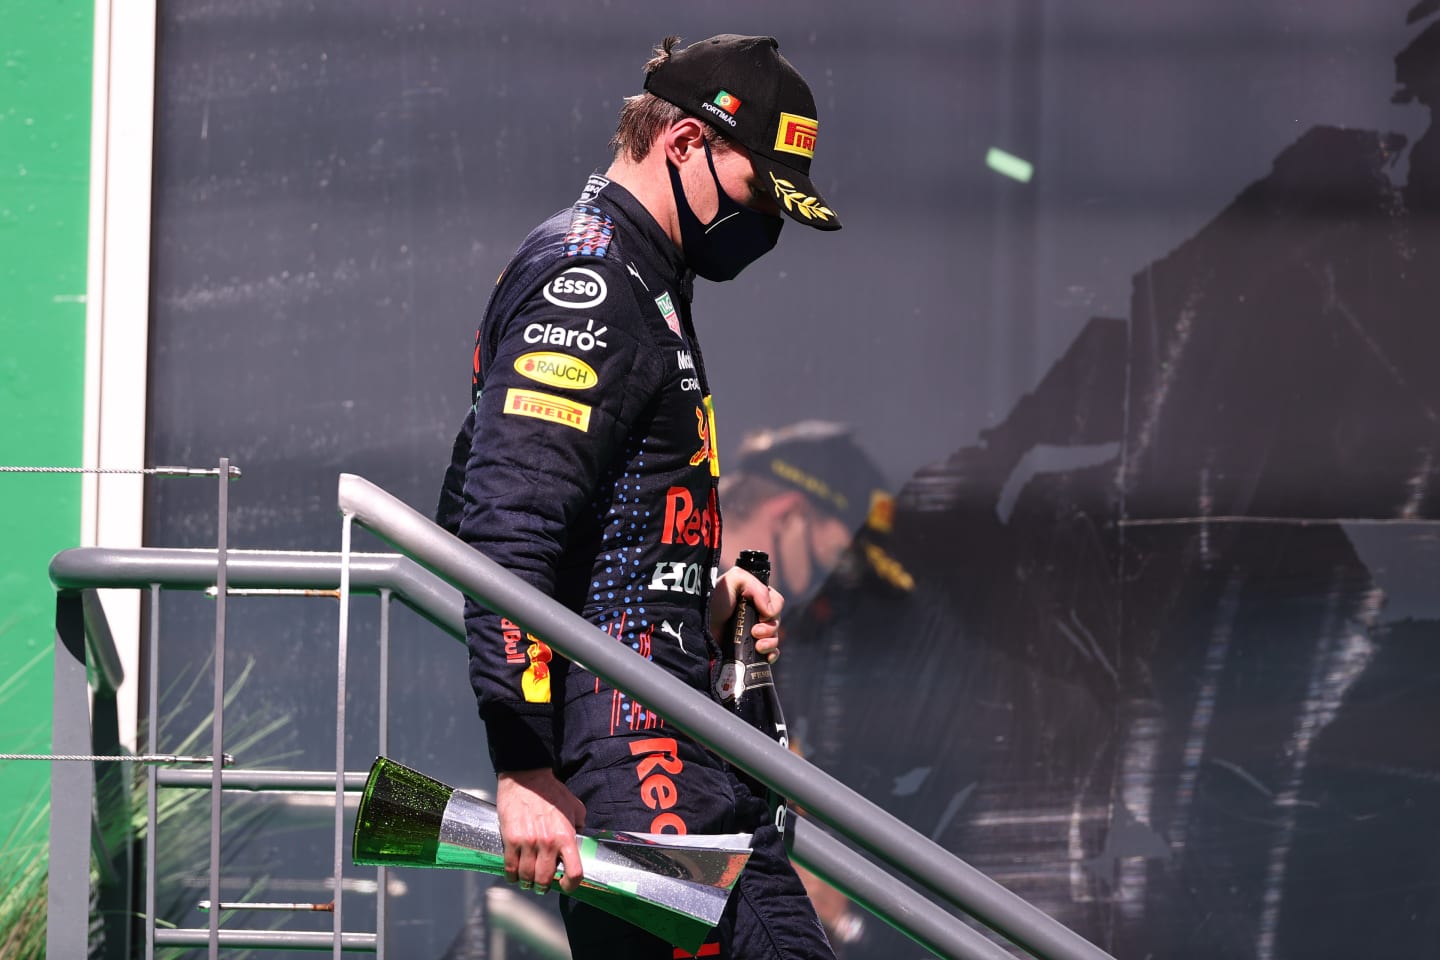 PORTIMAO, PORTUGAL - MAY 02: Second placed Max Verstappen of Netherlands and Red Bull Racing walks off the podium after the the F1 Grand Prix of Portugal at Autodromo Internacional Do Algarve on May 02, 2021 in Portimao, Portugal. (Photo by Lars Baron/Getty Images)